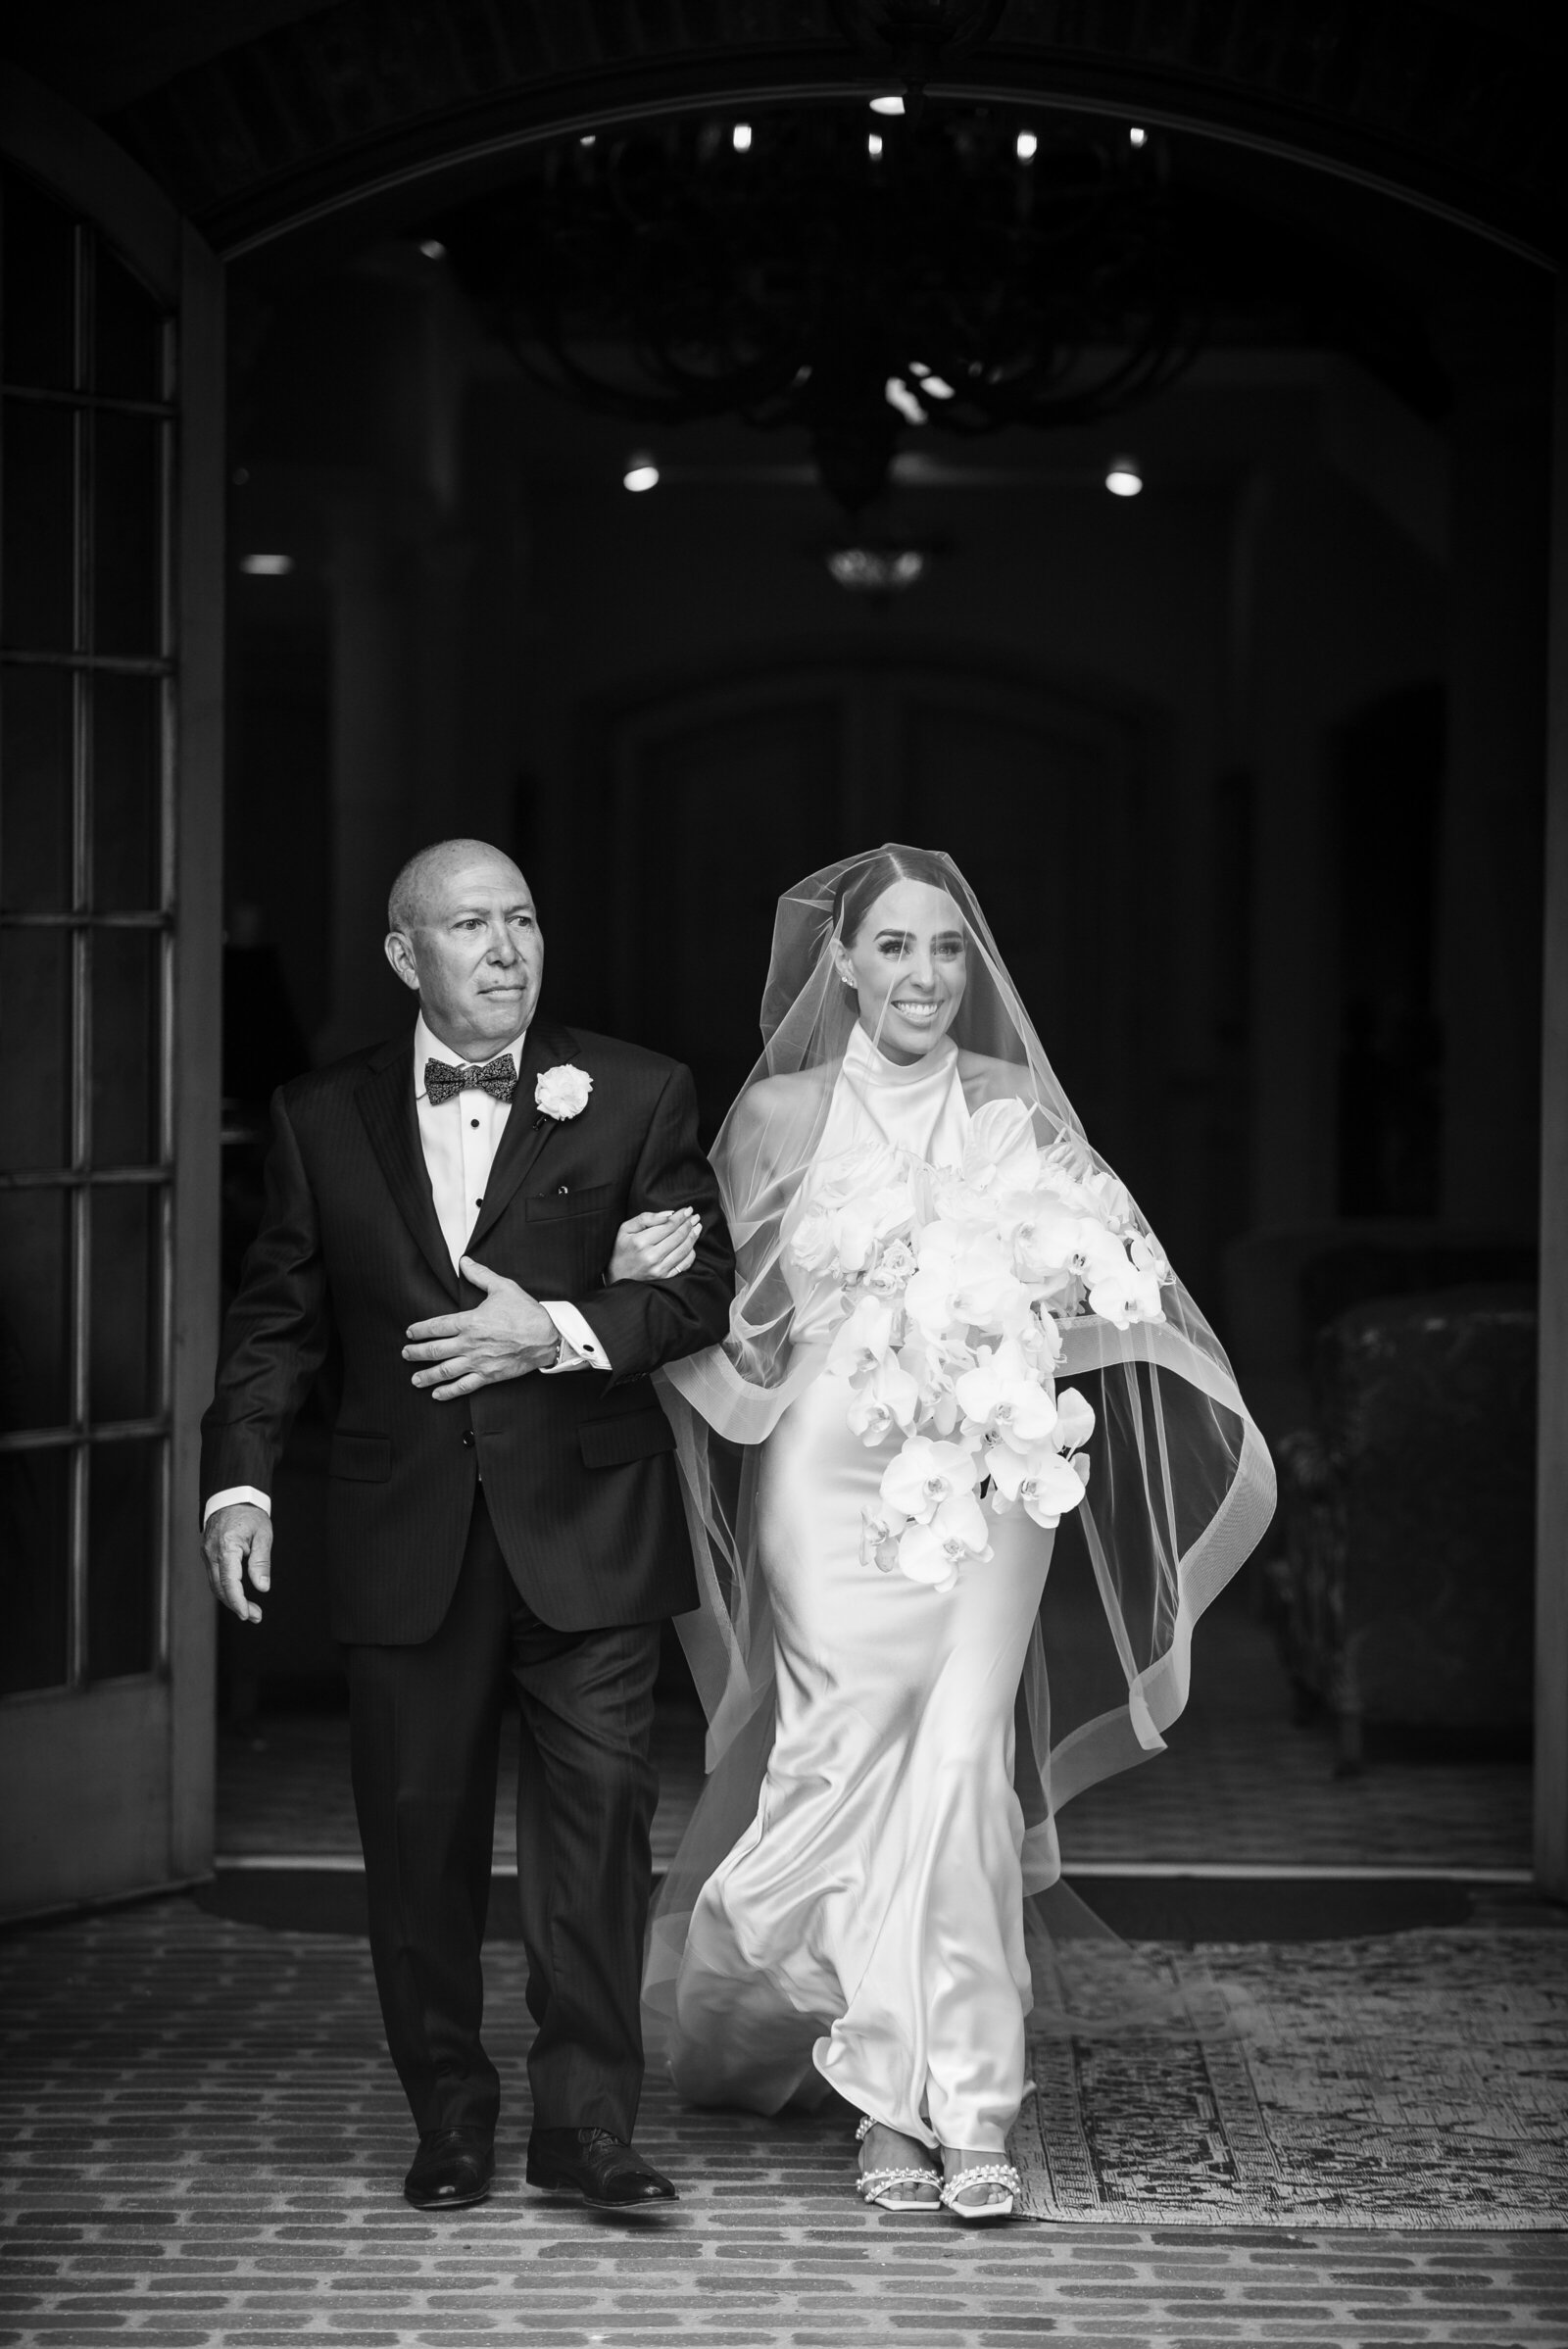 A candid moment of a dad walking his daughter down the aisle at her wedding captured by Colorado wedding photographer, Two One Photography.